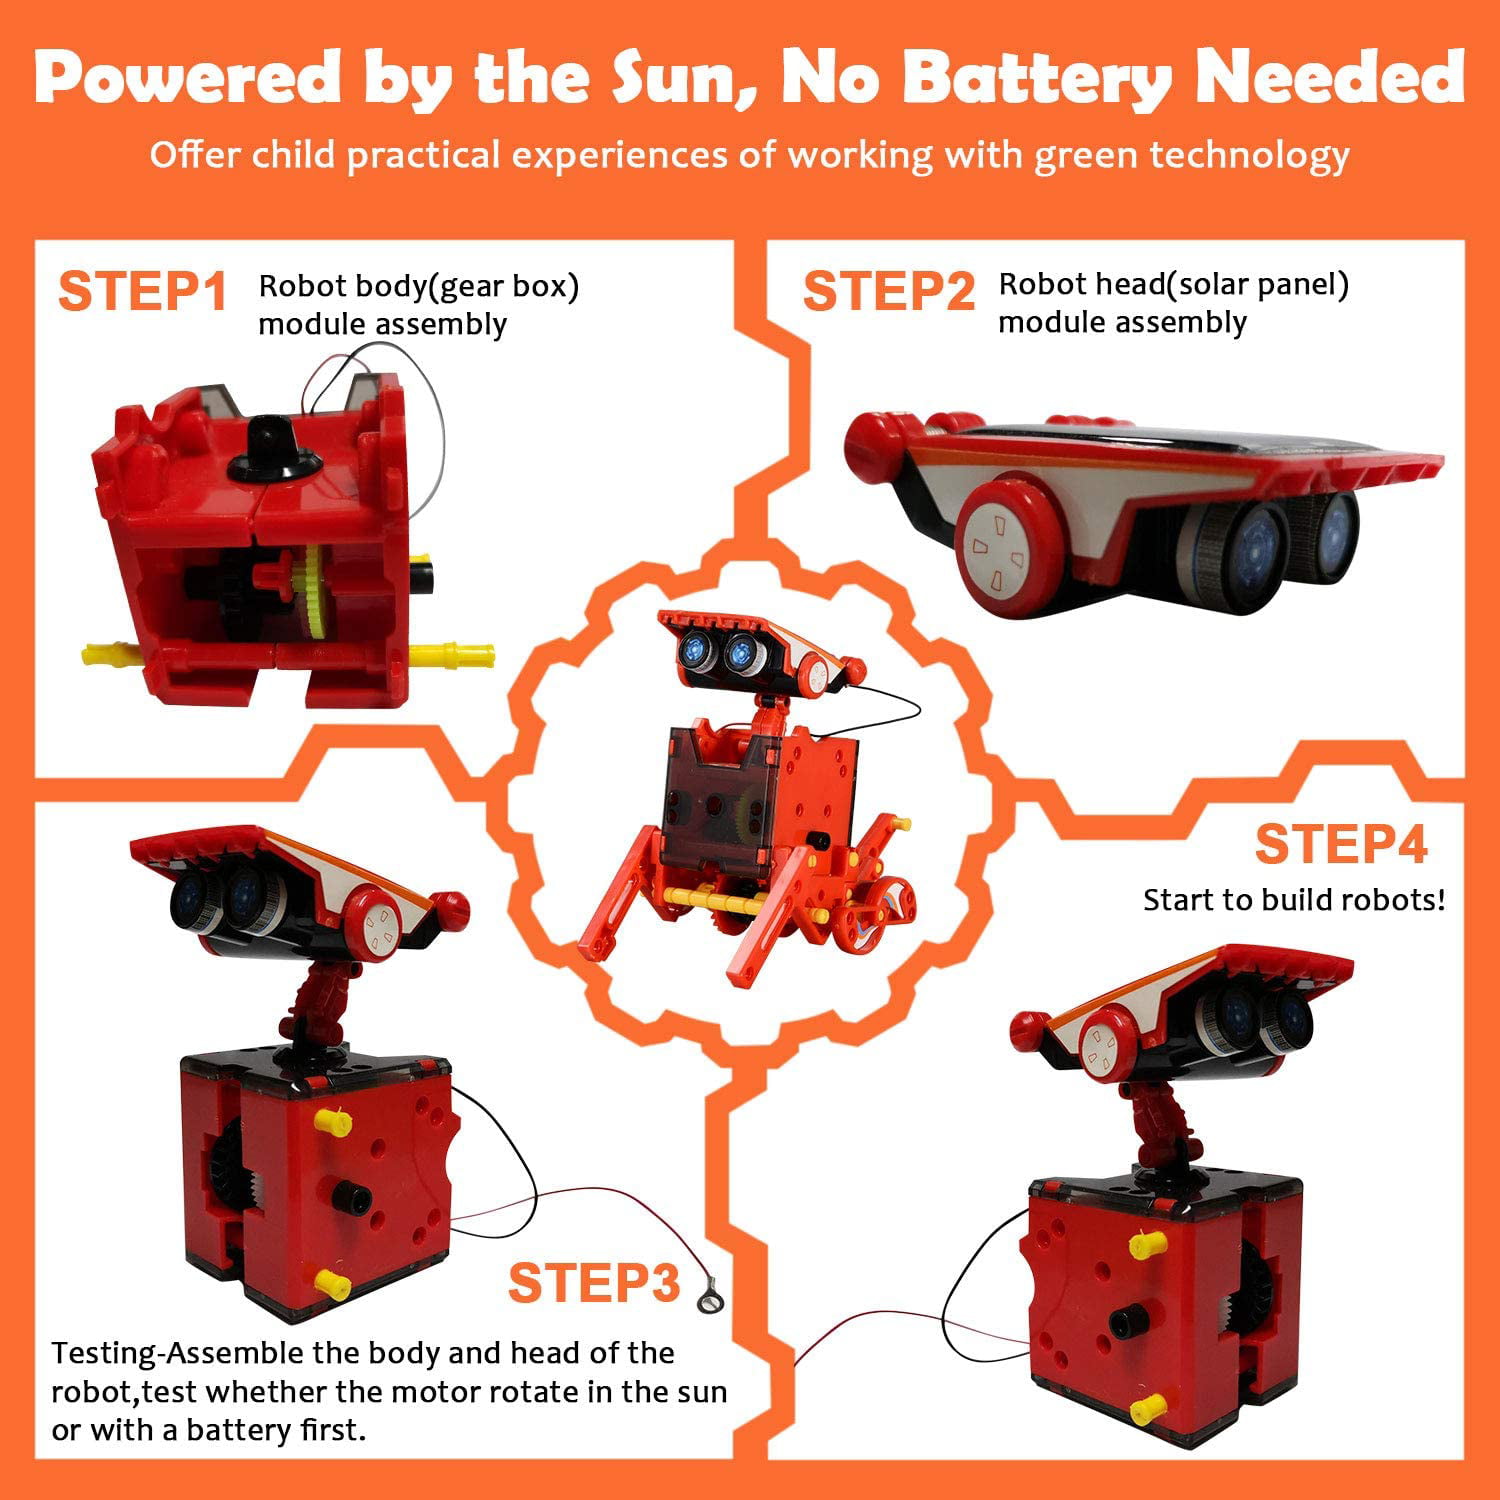 Hot Sell  Solar Robot Toys Stem 12-in-1 DIY Building Education  Science Experiment Kit for Kids - China Kid Toys and Stem Toys price